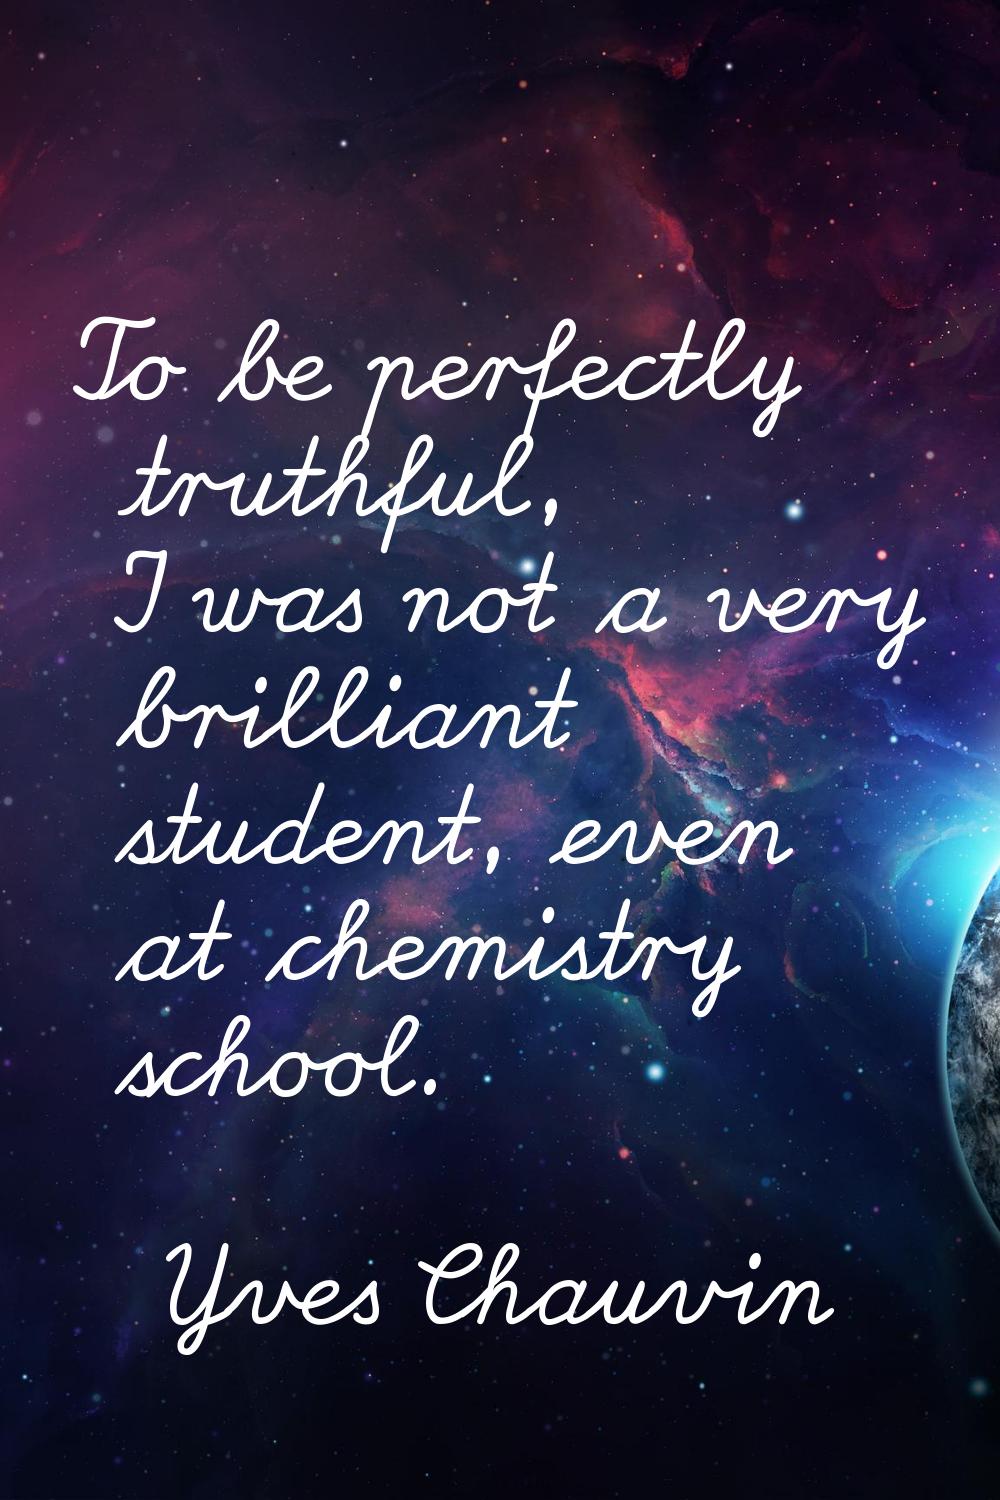 To be perfectly truthful, I was not a very brilliant student, even at chemistry school.